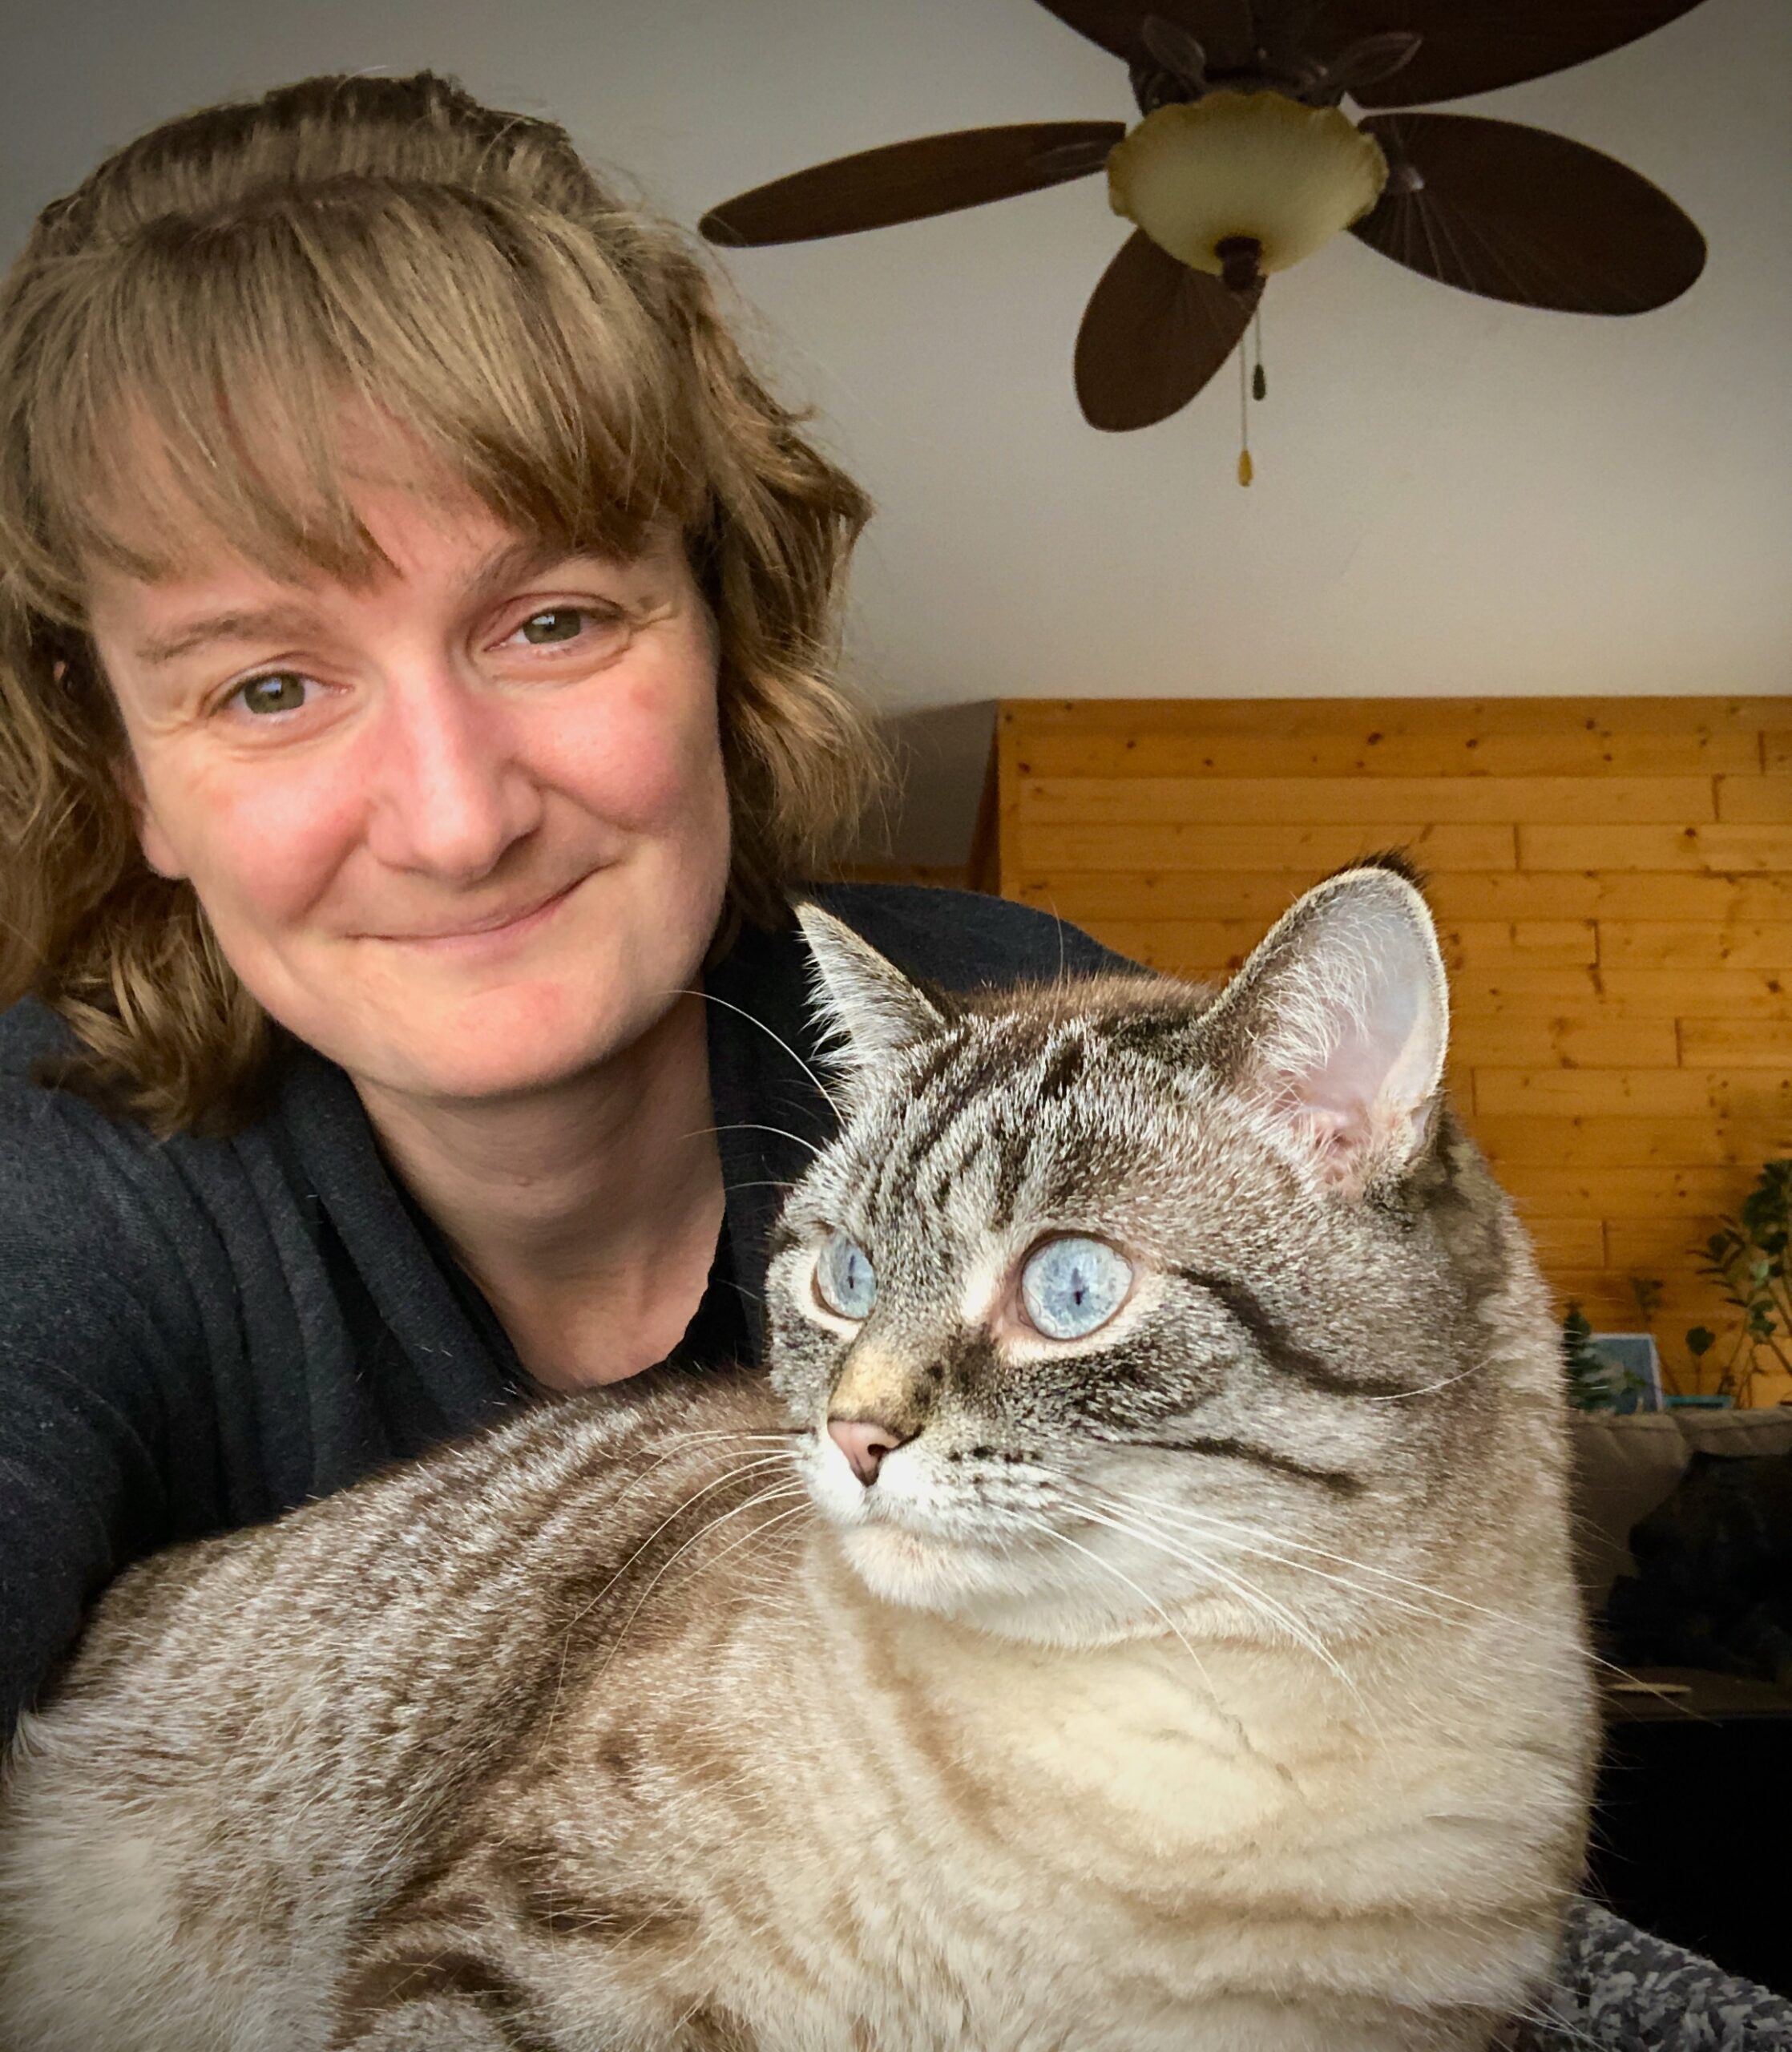 Photograph of the author, Haley, and her cat Calypso.